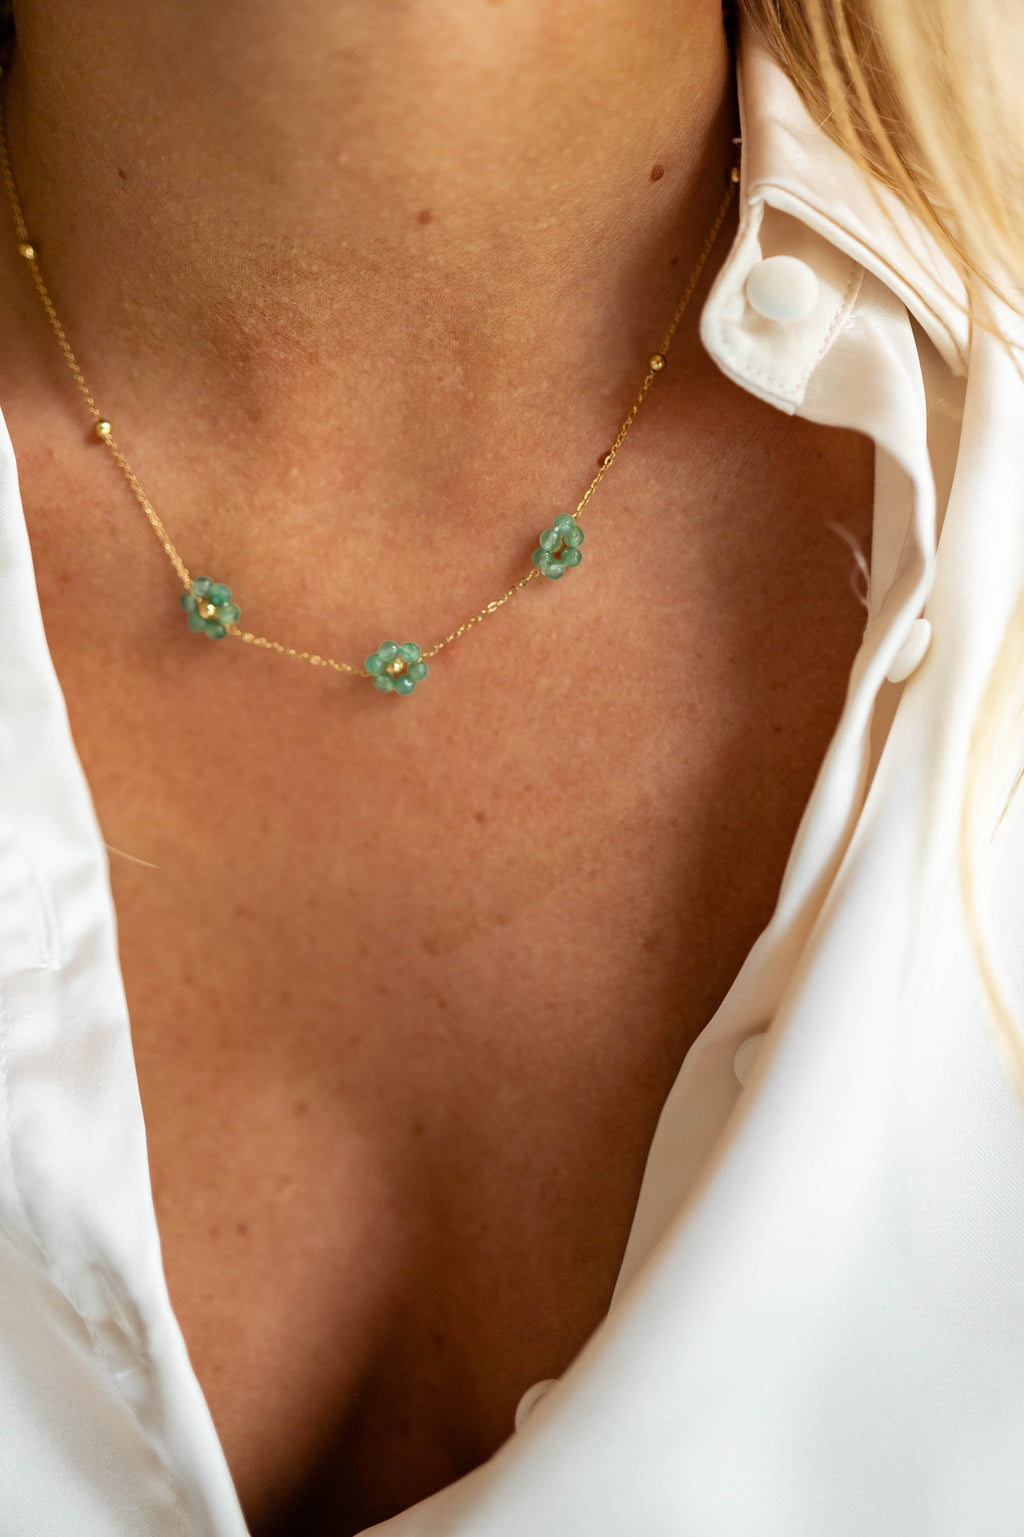 Flowi necklace - green and Golden